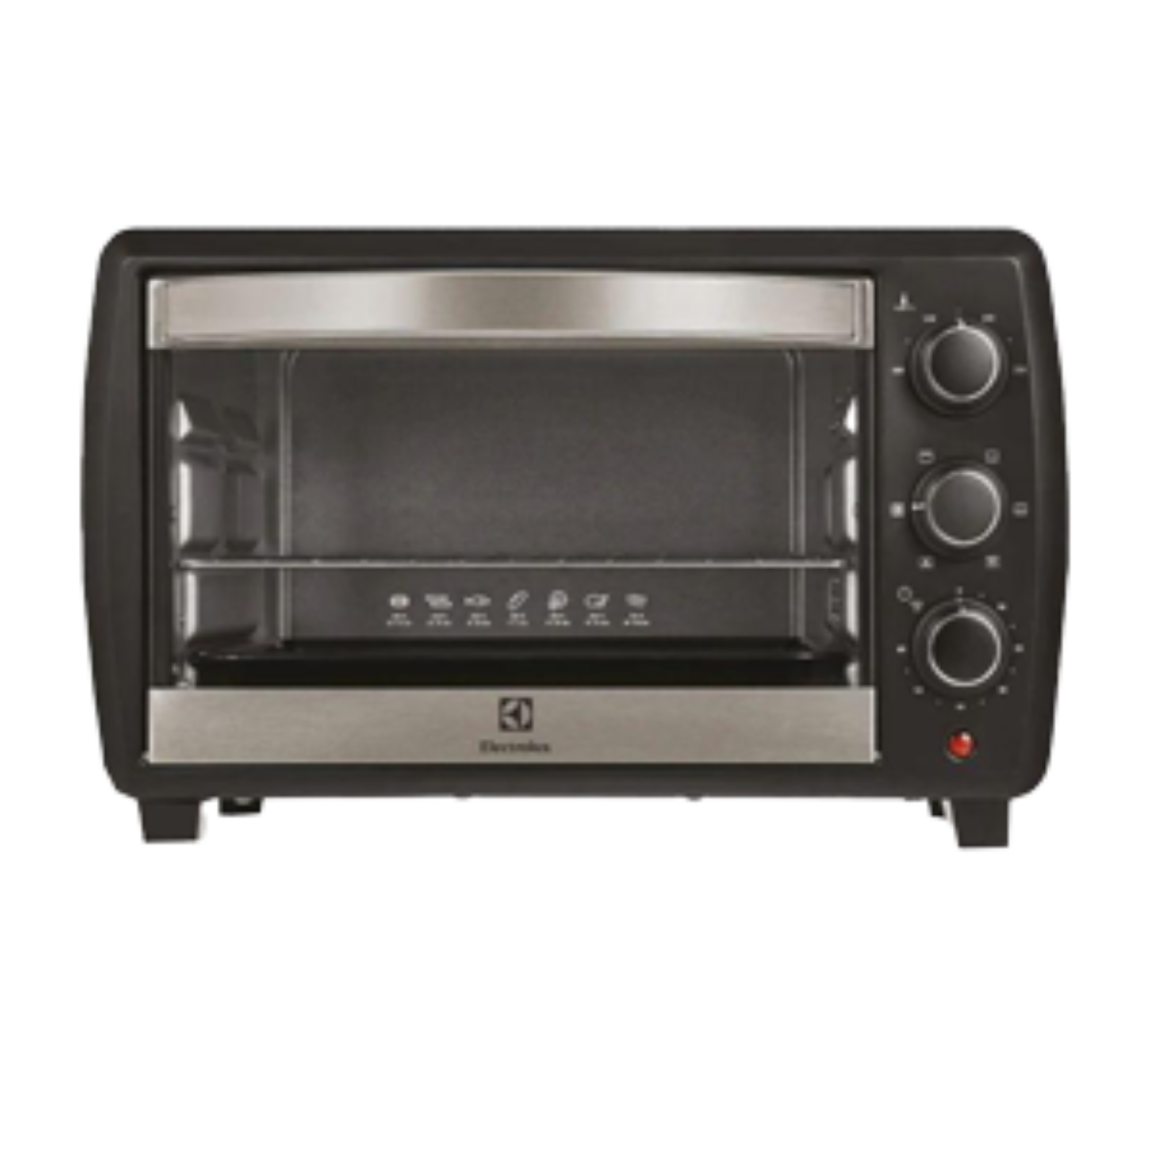 Electrolux EOT4805K Oven Toaster 21L Black Electrolux Microwave / Oven / Steam Oven Kitchen Microwave / Oven / Steam Oven Choose Sample / Pattern Chart